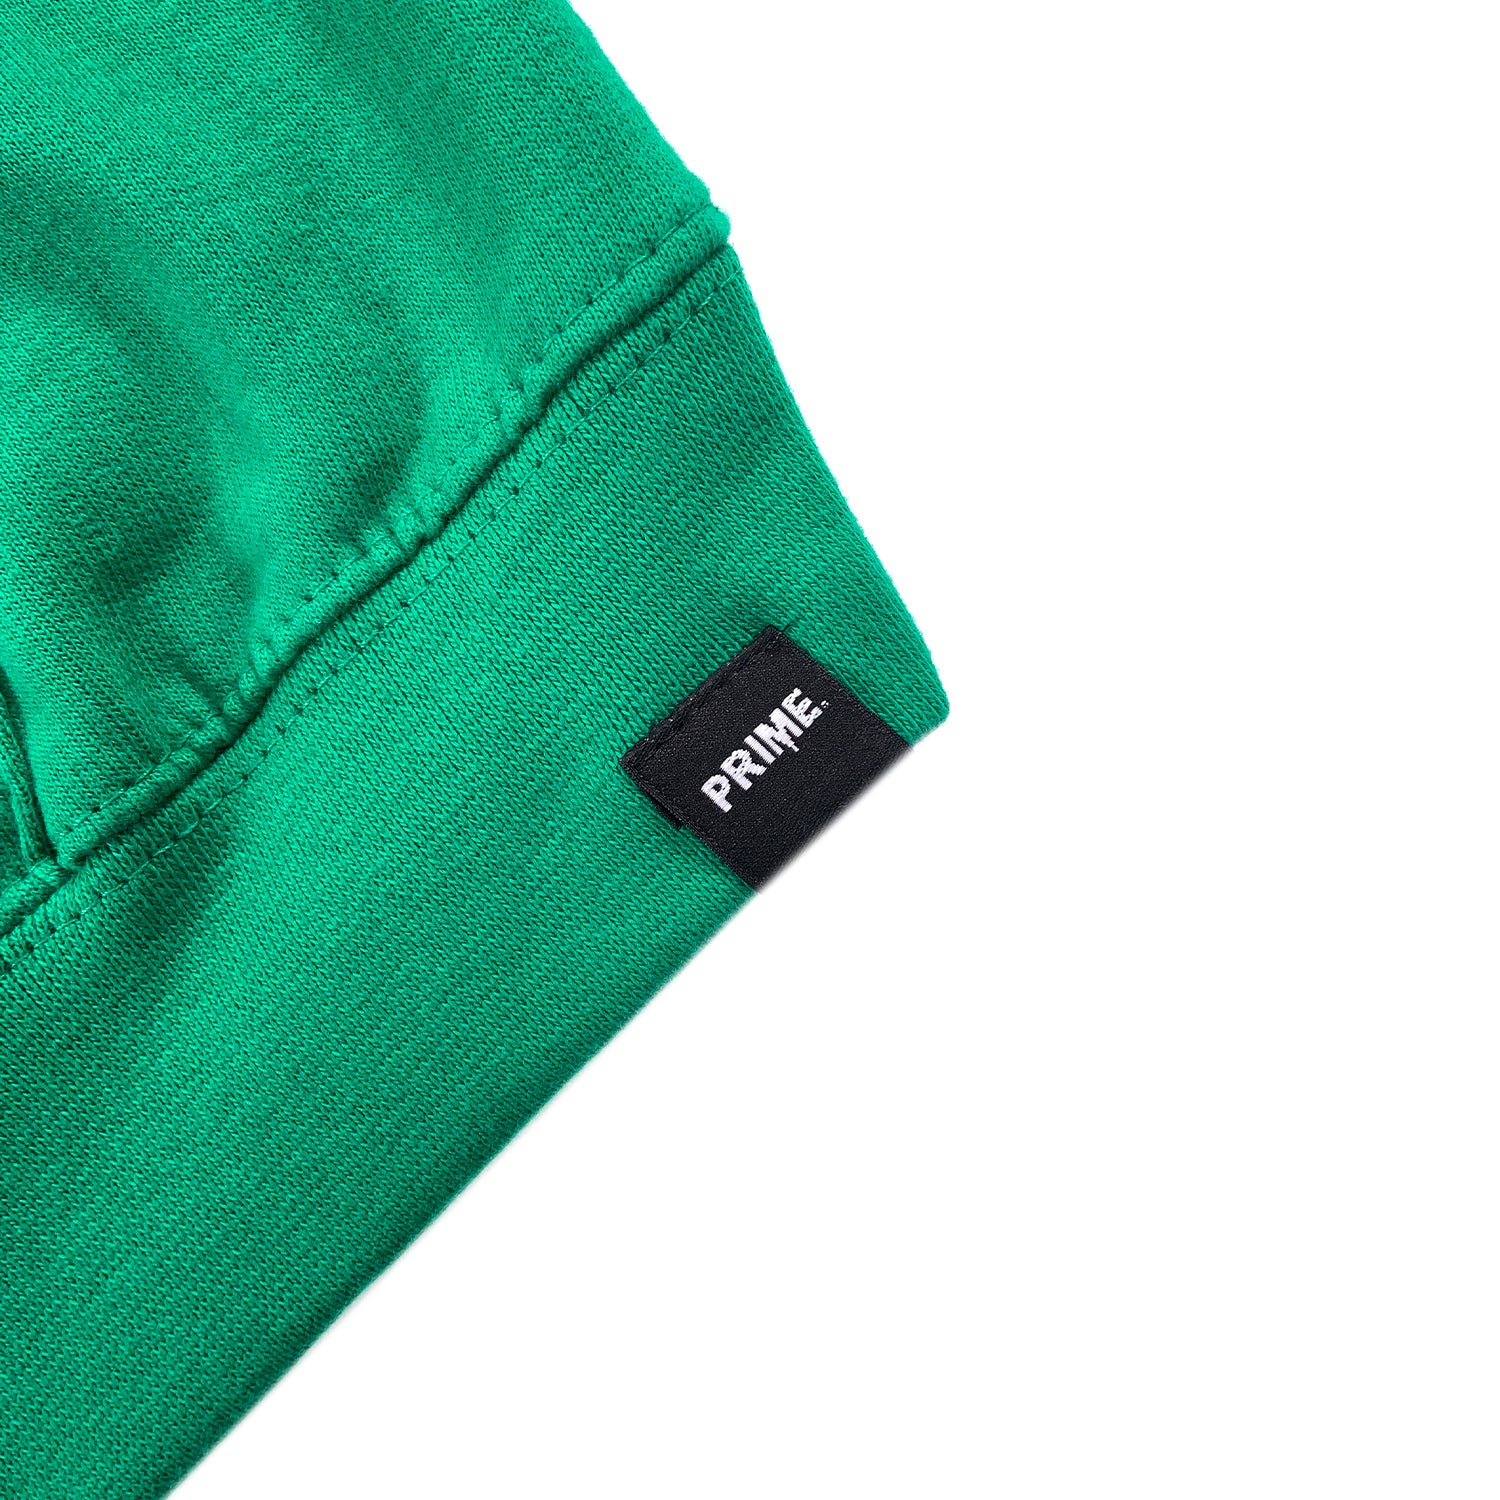 PRIME DELUX YOUTHS OG PREMIUM HOODED SWEAT - KELLY GREEN / WHITE - Prime Delux Store